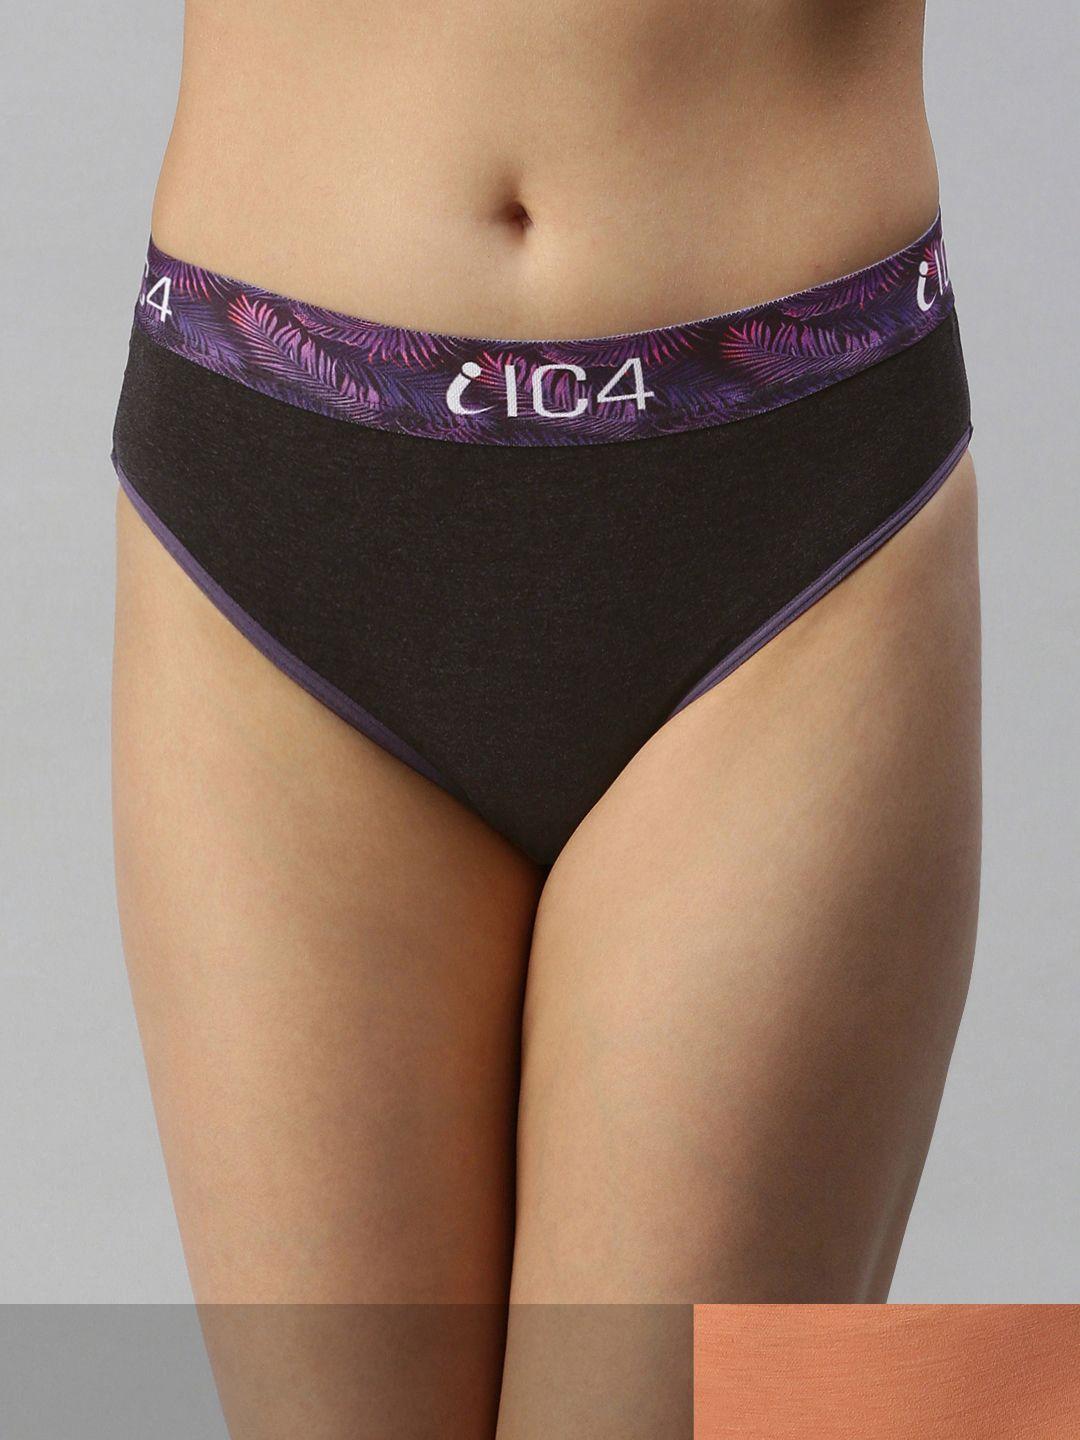 ic4 women peach & charcoal solid pack of 2 hipster briefs- 0c-o-1011p2